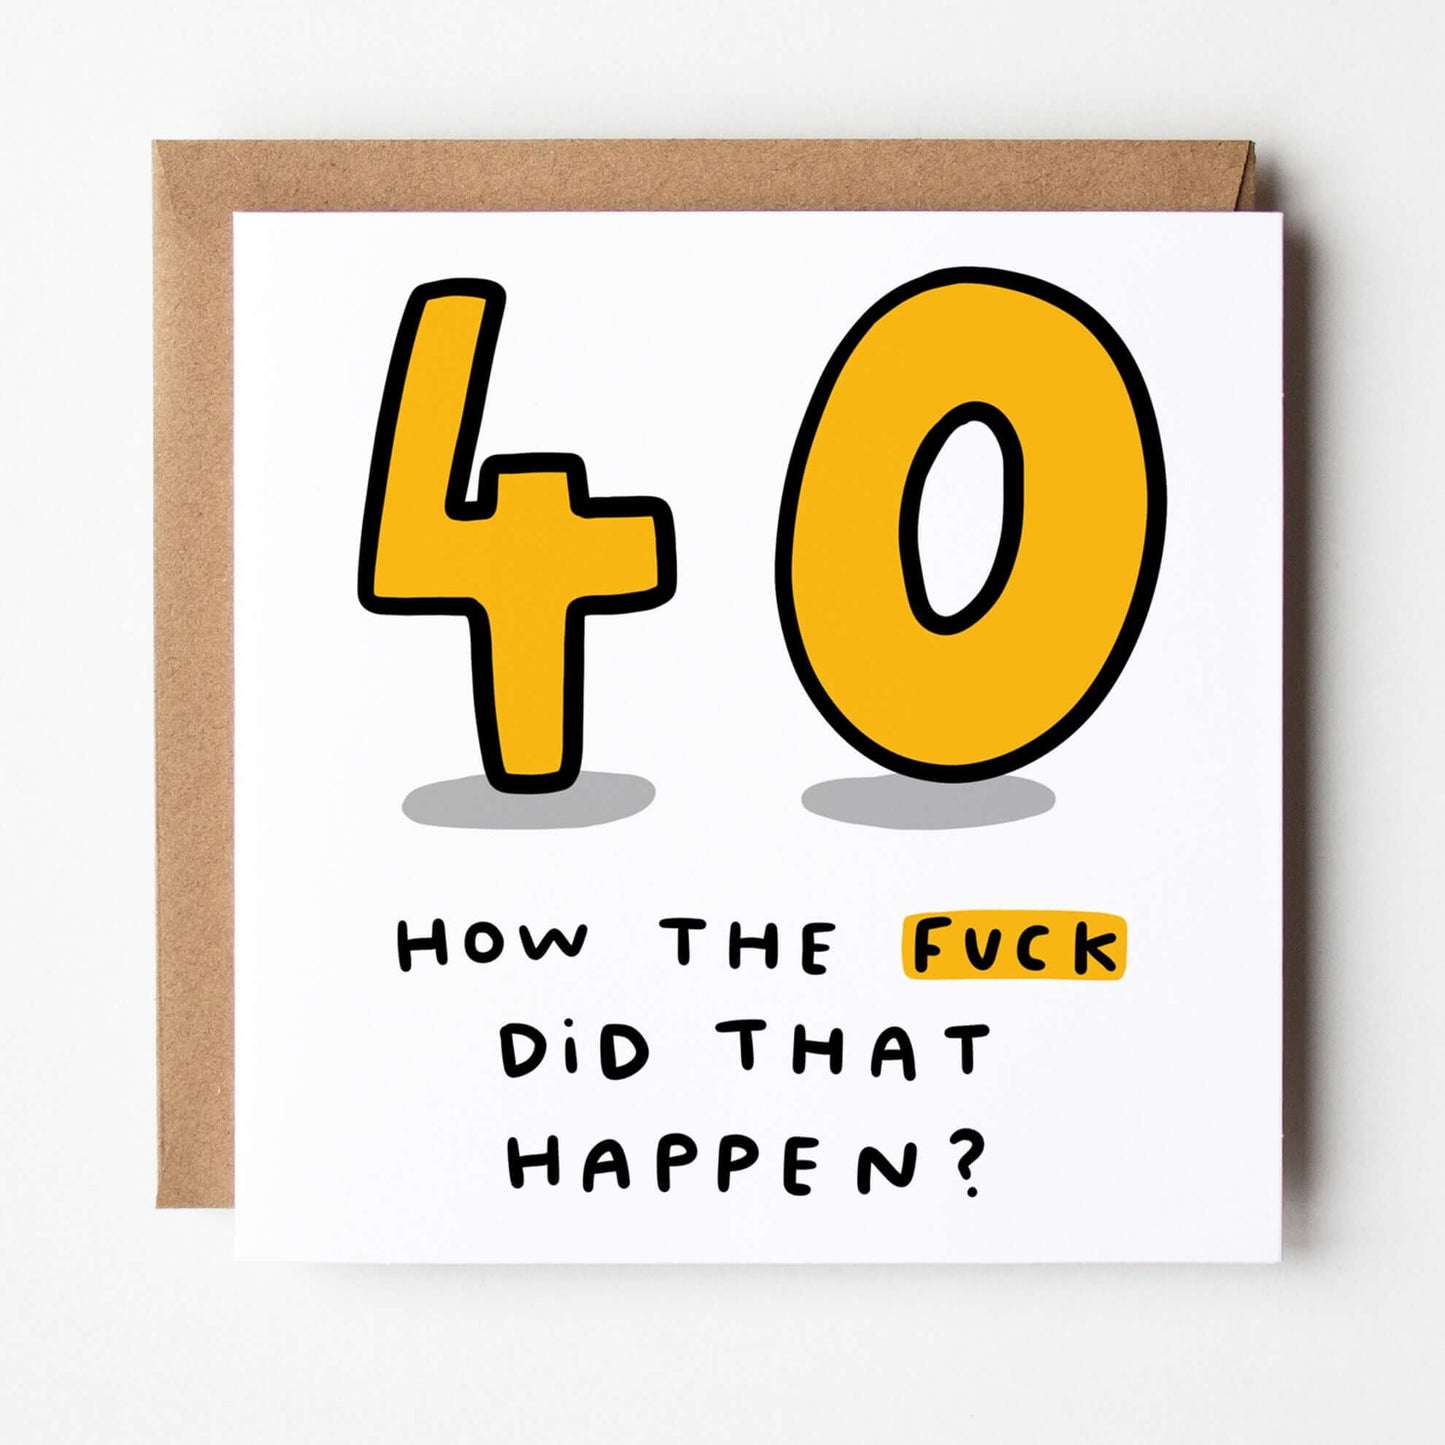 Dandy Sloth 40 How The Fuck Did That Happen 40th Birthday Square Greeting Card Birthday Cards Dandy Sloth